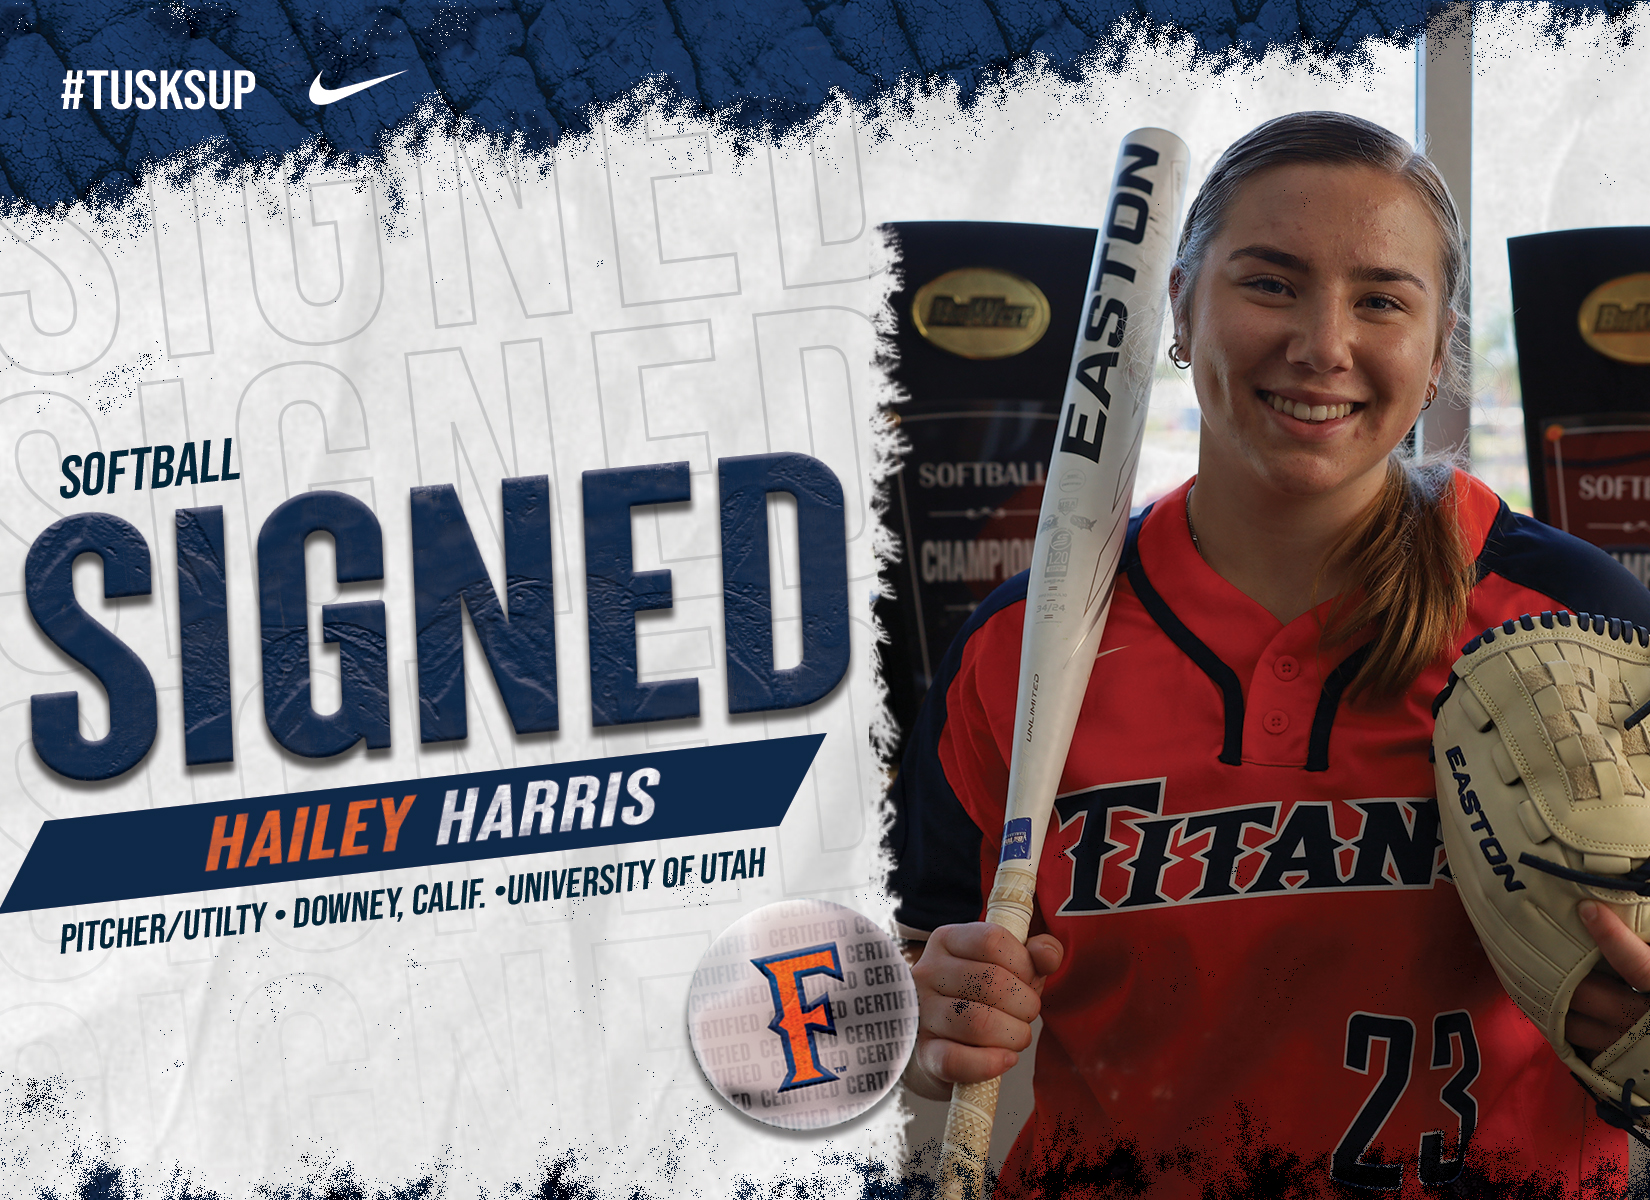 Softball Adds Hailey Harris to Roster